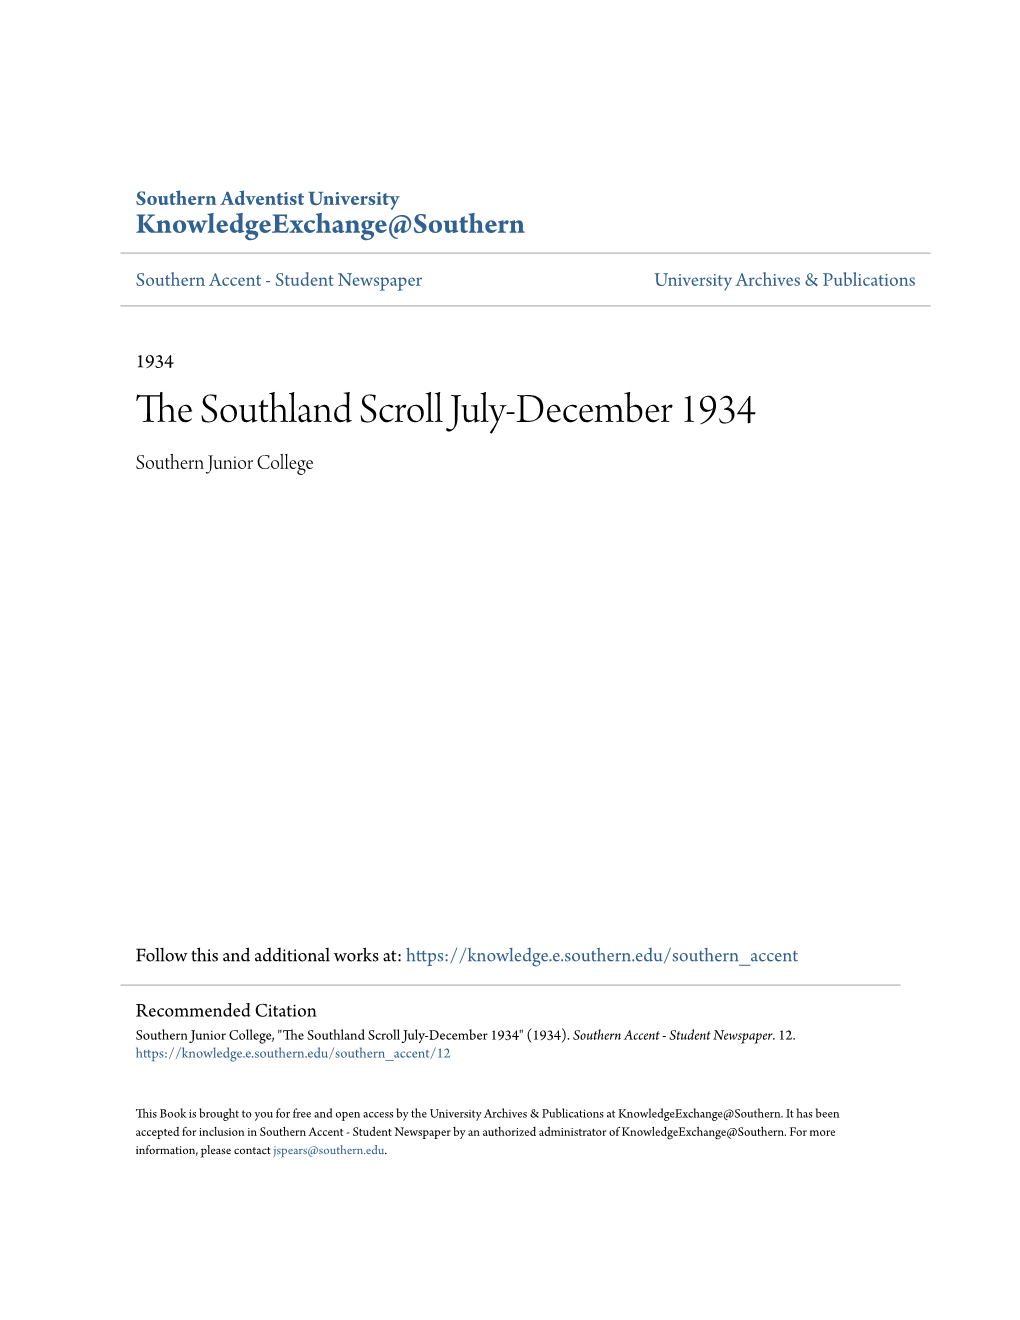 The Southland Scroll July-December 1934